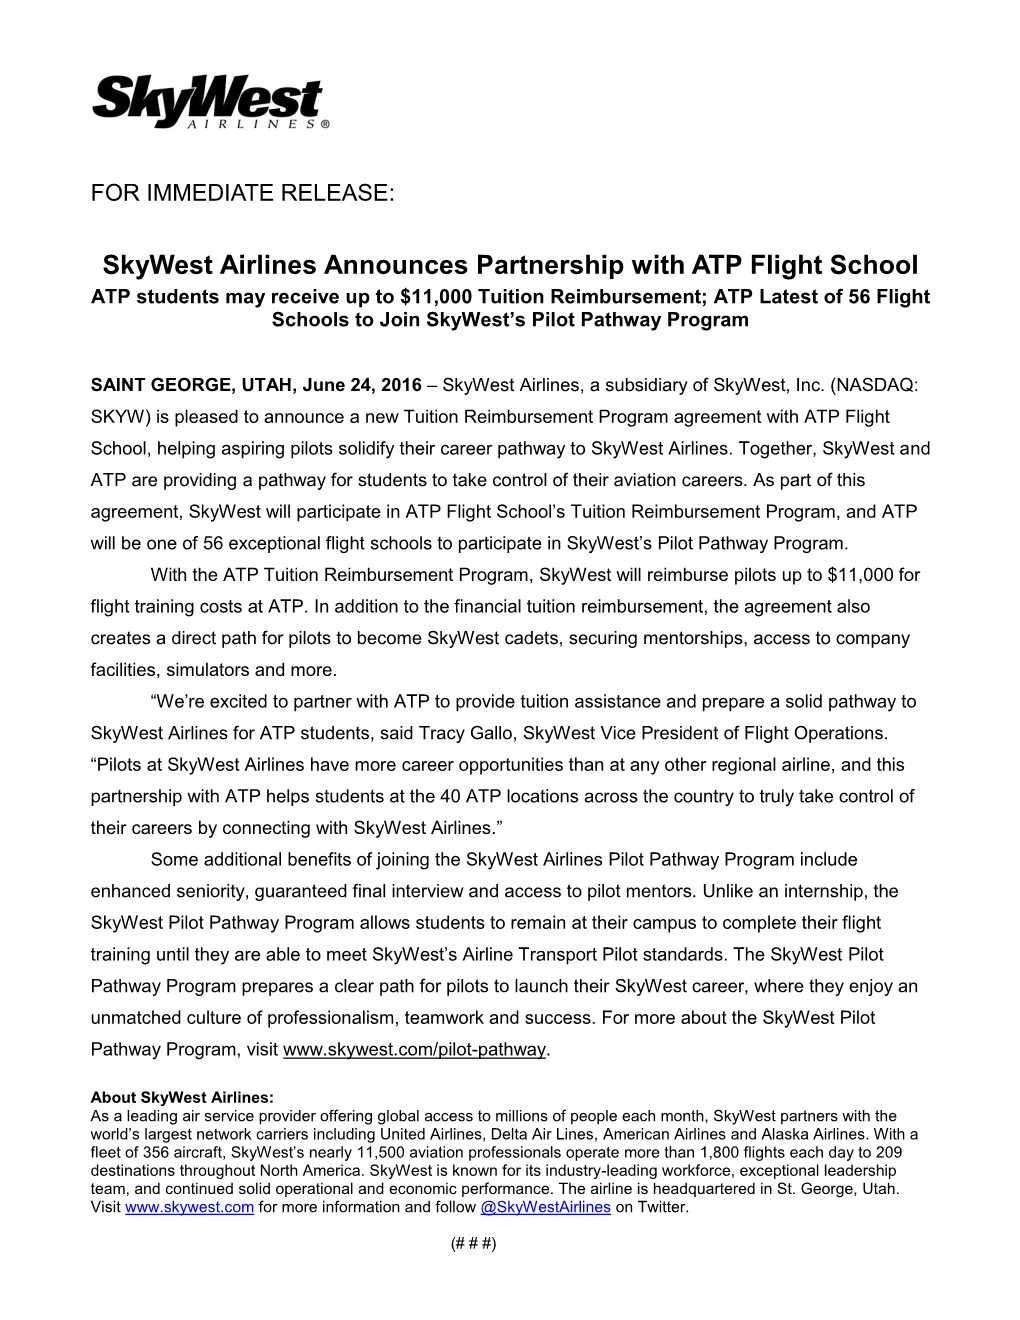 Skywest Airlines Announces Partnership with ATP Flight School